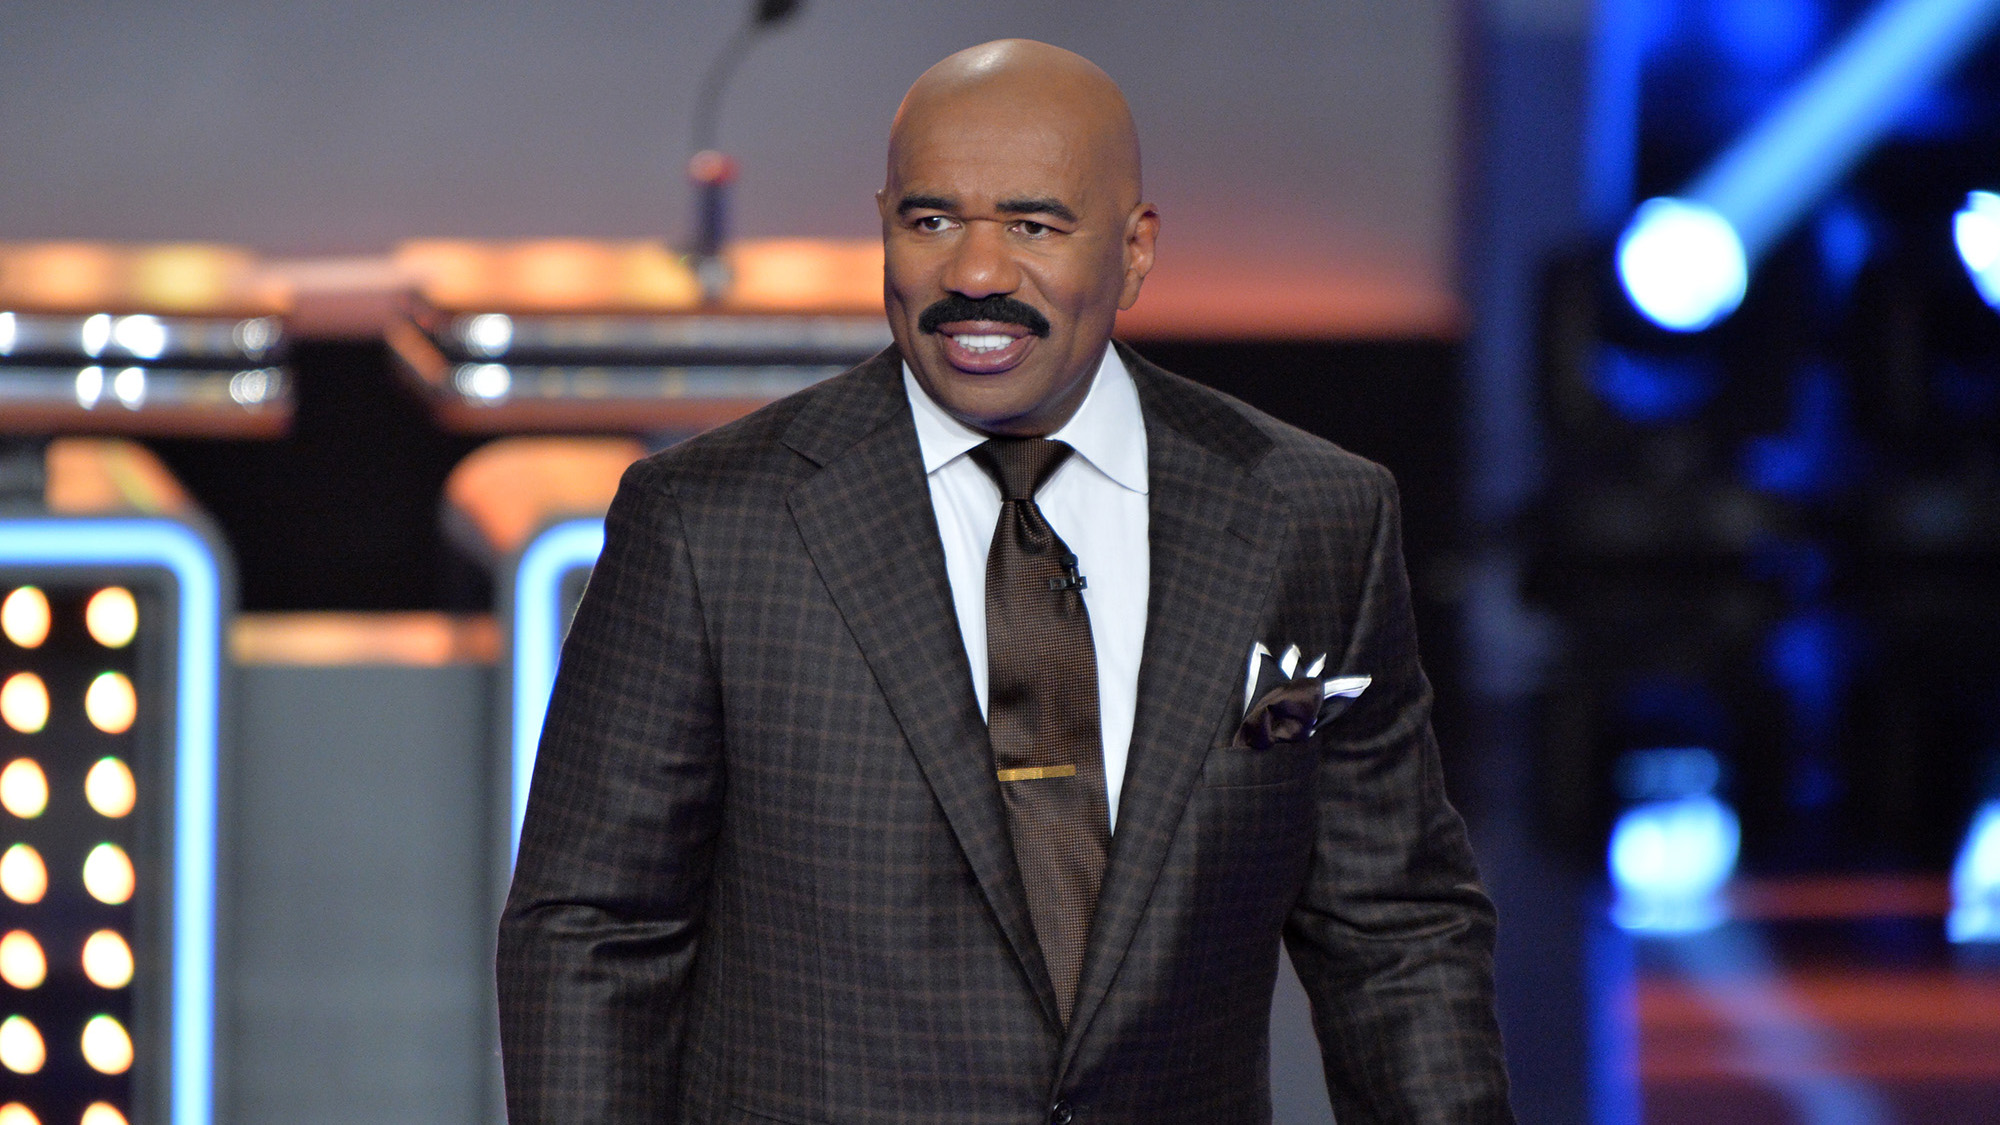 Steve Harvey has been delighting guests and viewers alike for nearly a deca...